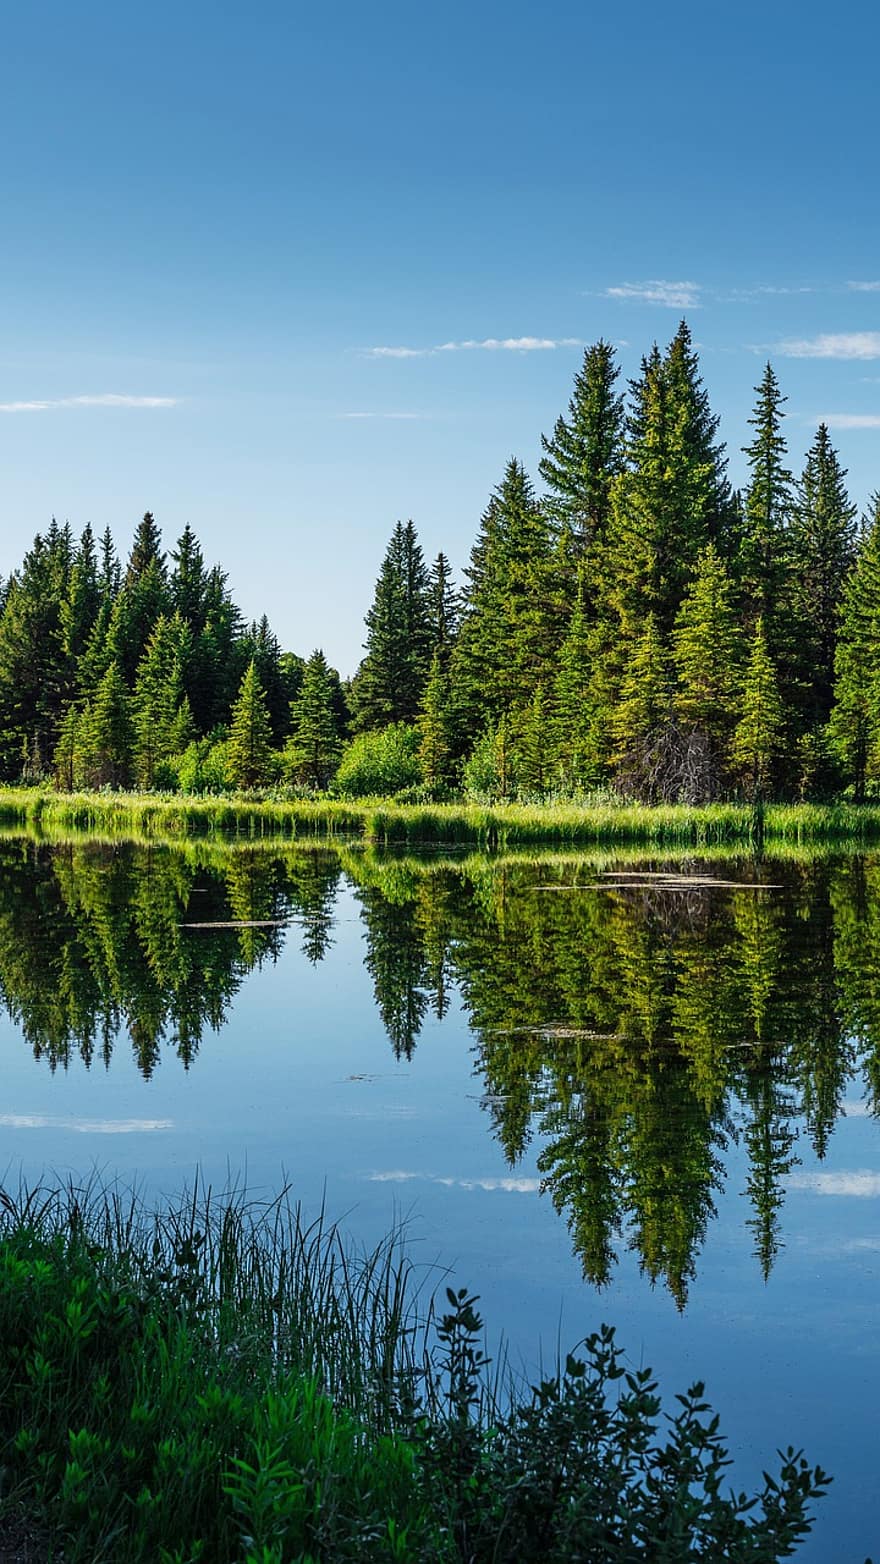 Lake, Sky, Forest, Trees, Leaves, Grass, Green, Reflection, Outdoors, Wilderness, Nature